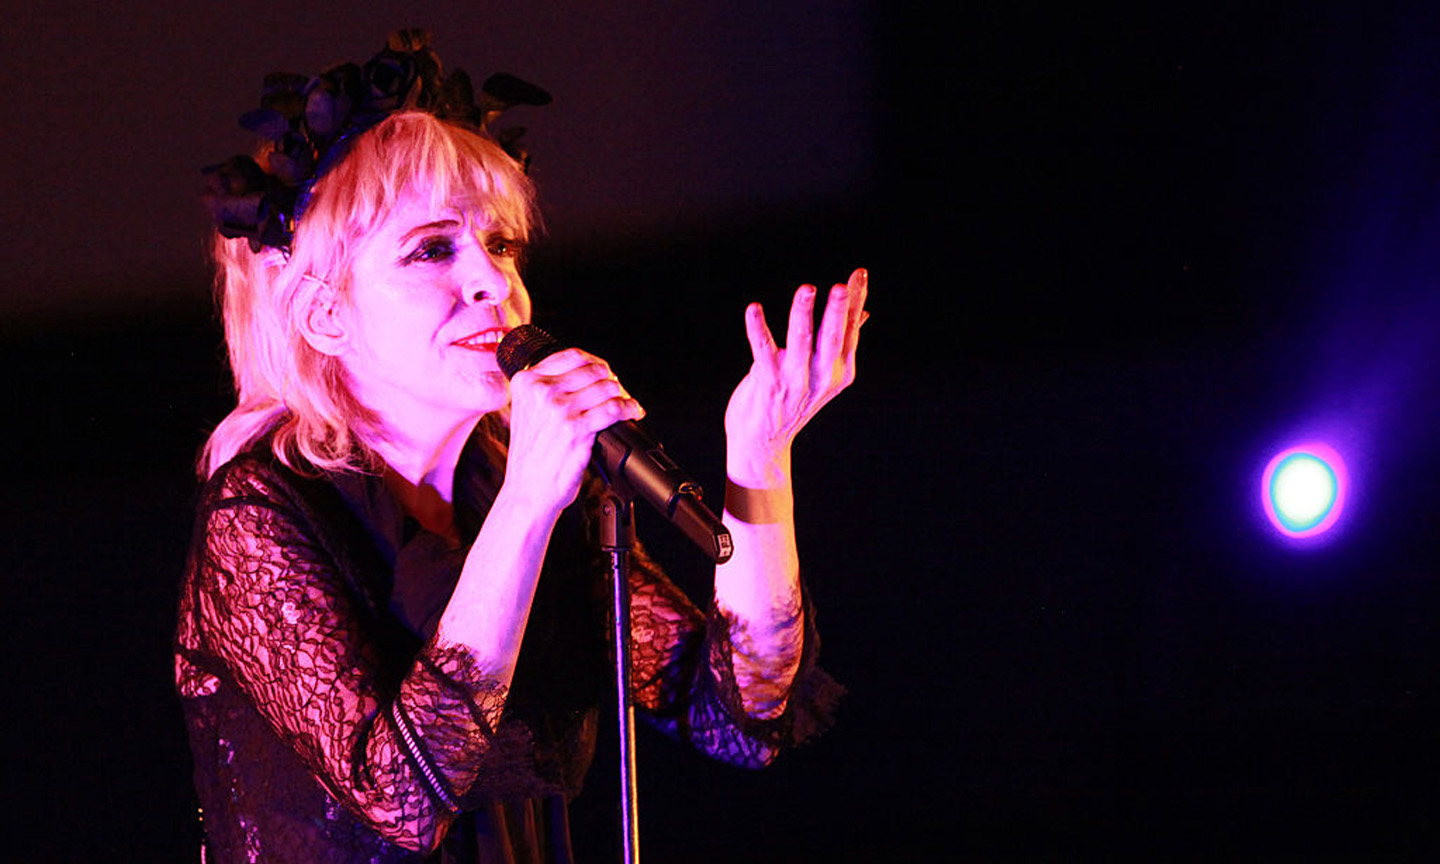 Julee Cruise, Frequent Lynch Collaborator, Dies At 65